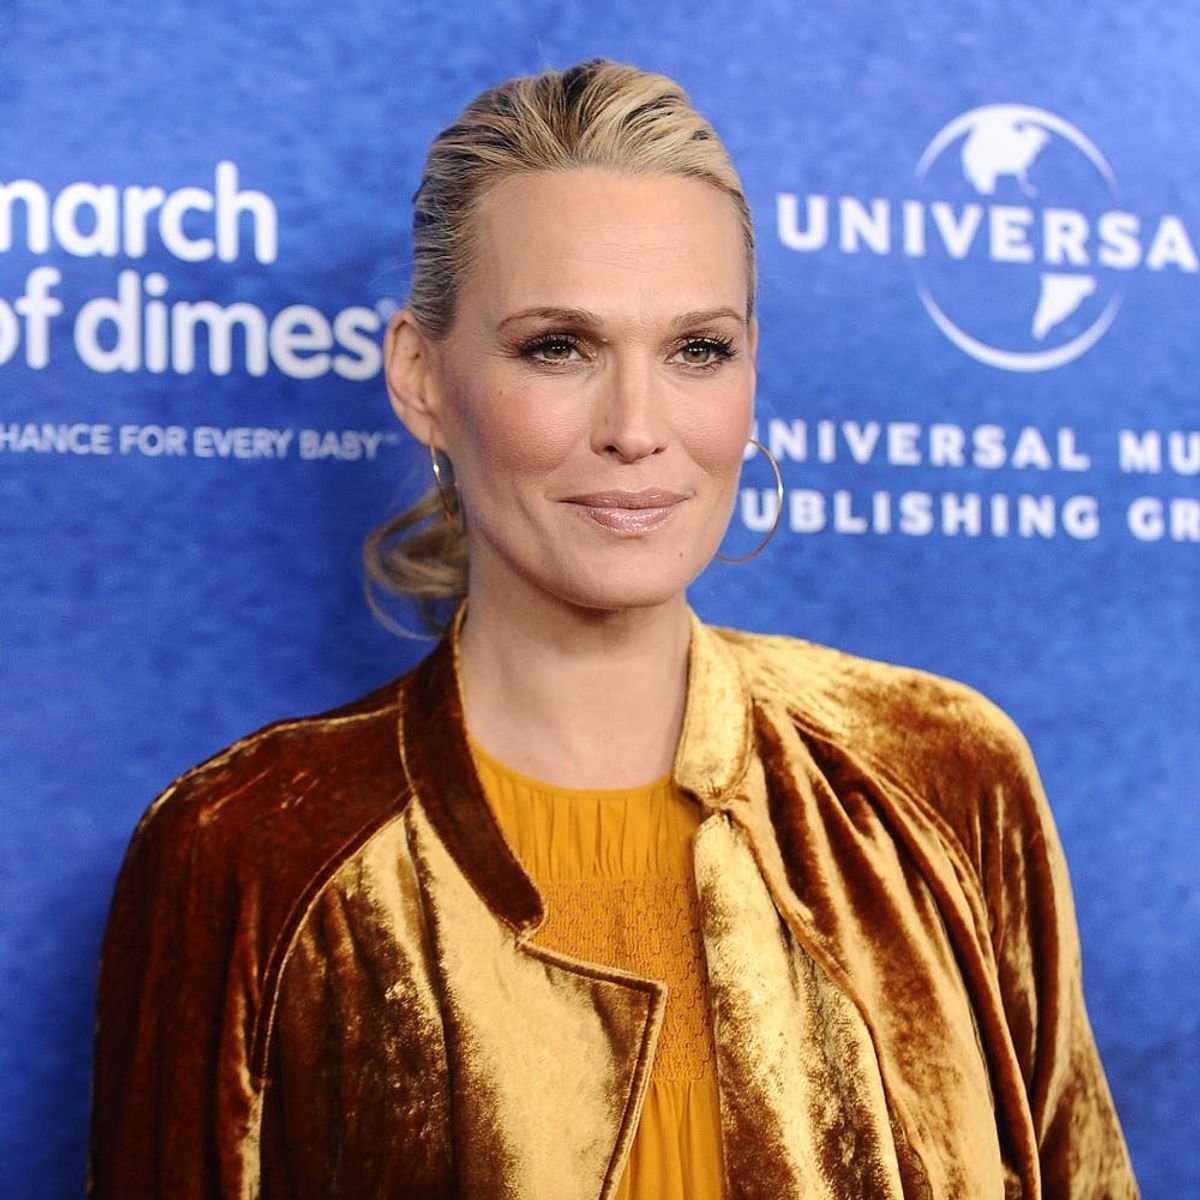 Molly Sims Just Welcomed a Baby Boy and His Name Is As Cute As His Tiny Face